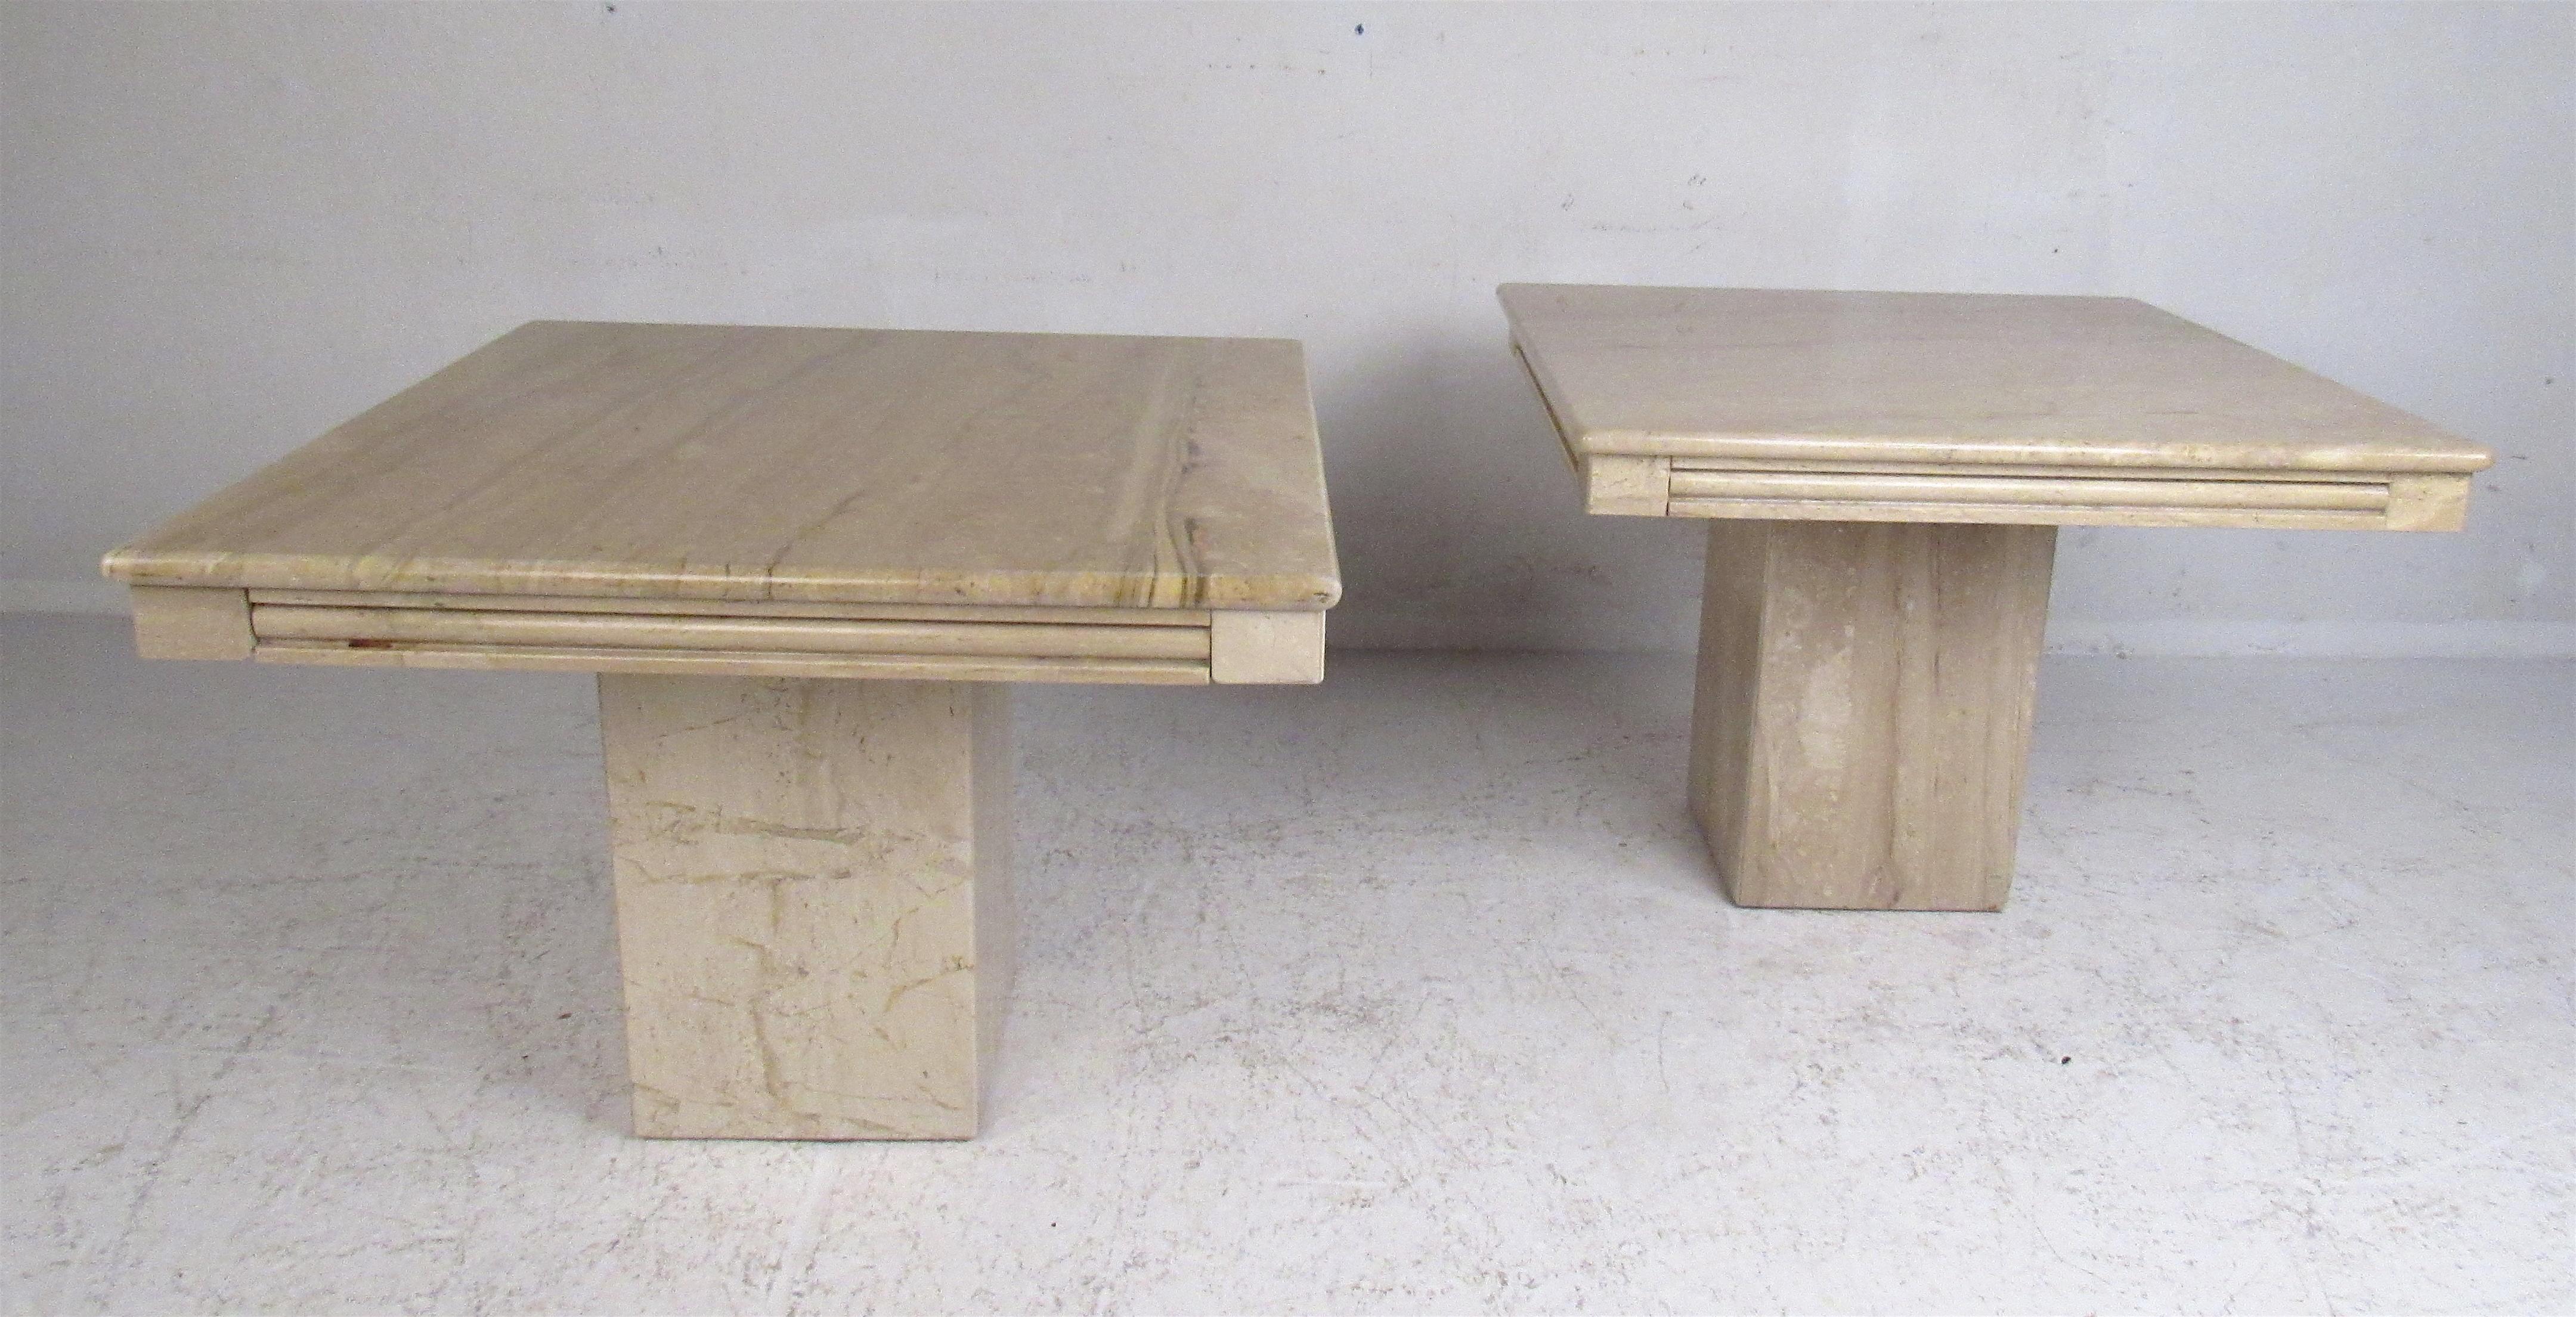 A beautiful midcentury set of three marble tables with a pedestal base. This stunning living room set includes a coffee table and two end tables. A wild design that is sure to make a lasting impression in any modern interior. Please confirm the item